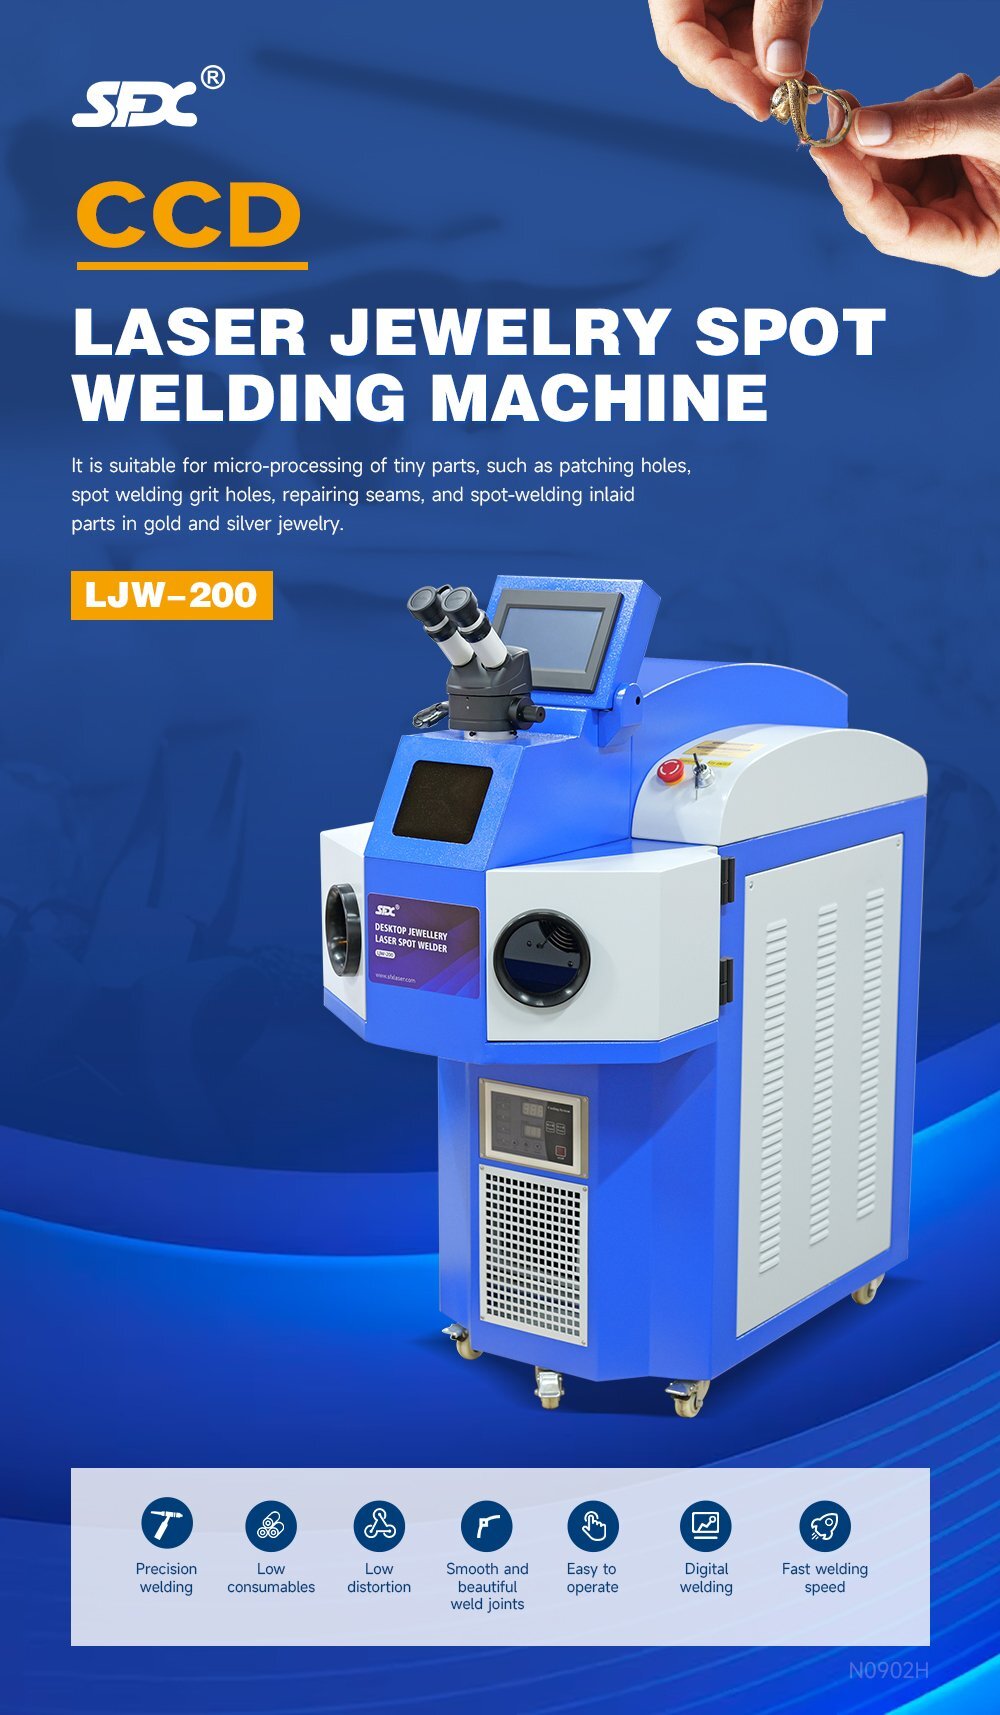 SFX 200W Laser Spot Wedling Machine with CCD for Gold Silver Jewelry Fast and Precise Spot Welding Smooth Weld Joints SFX 200W Laser Spot Wedling Machine with CCD Gold Silver Jewelry Fast and Precise Spot Welding Smooth Weld Joints 200W CCD laser jewelry spot welding machine,jewelry laser spot welding machine with CCD,jewelry spot welder 200w fast welding,CCD laser jewelry spot welding machine on sale,200w spot welding machine for jewelry welding,jewelry laser welder,jewelry welding machine,laser soldering jewelry,gold spot welding machine,jewelry tack welder,spot welder for jewelry